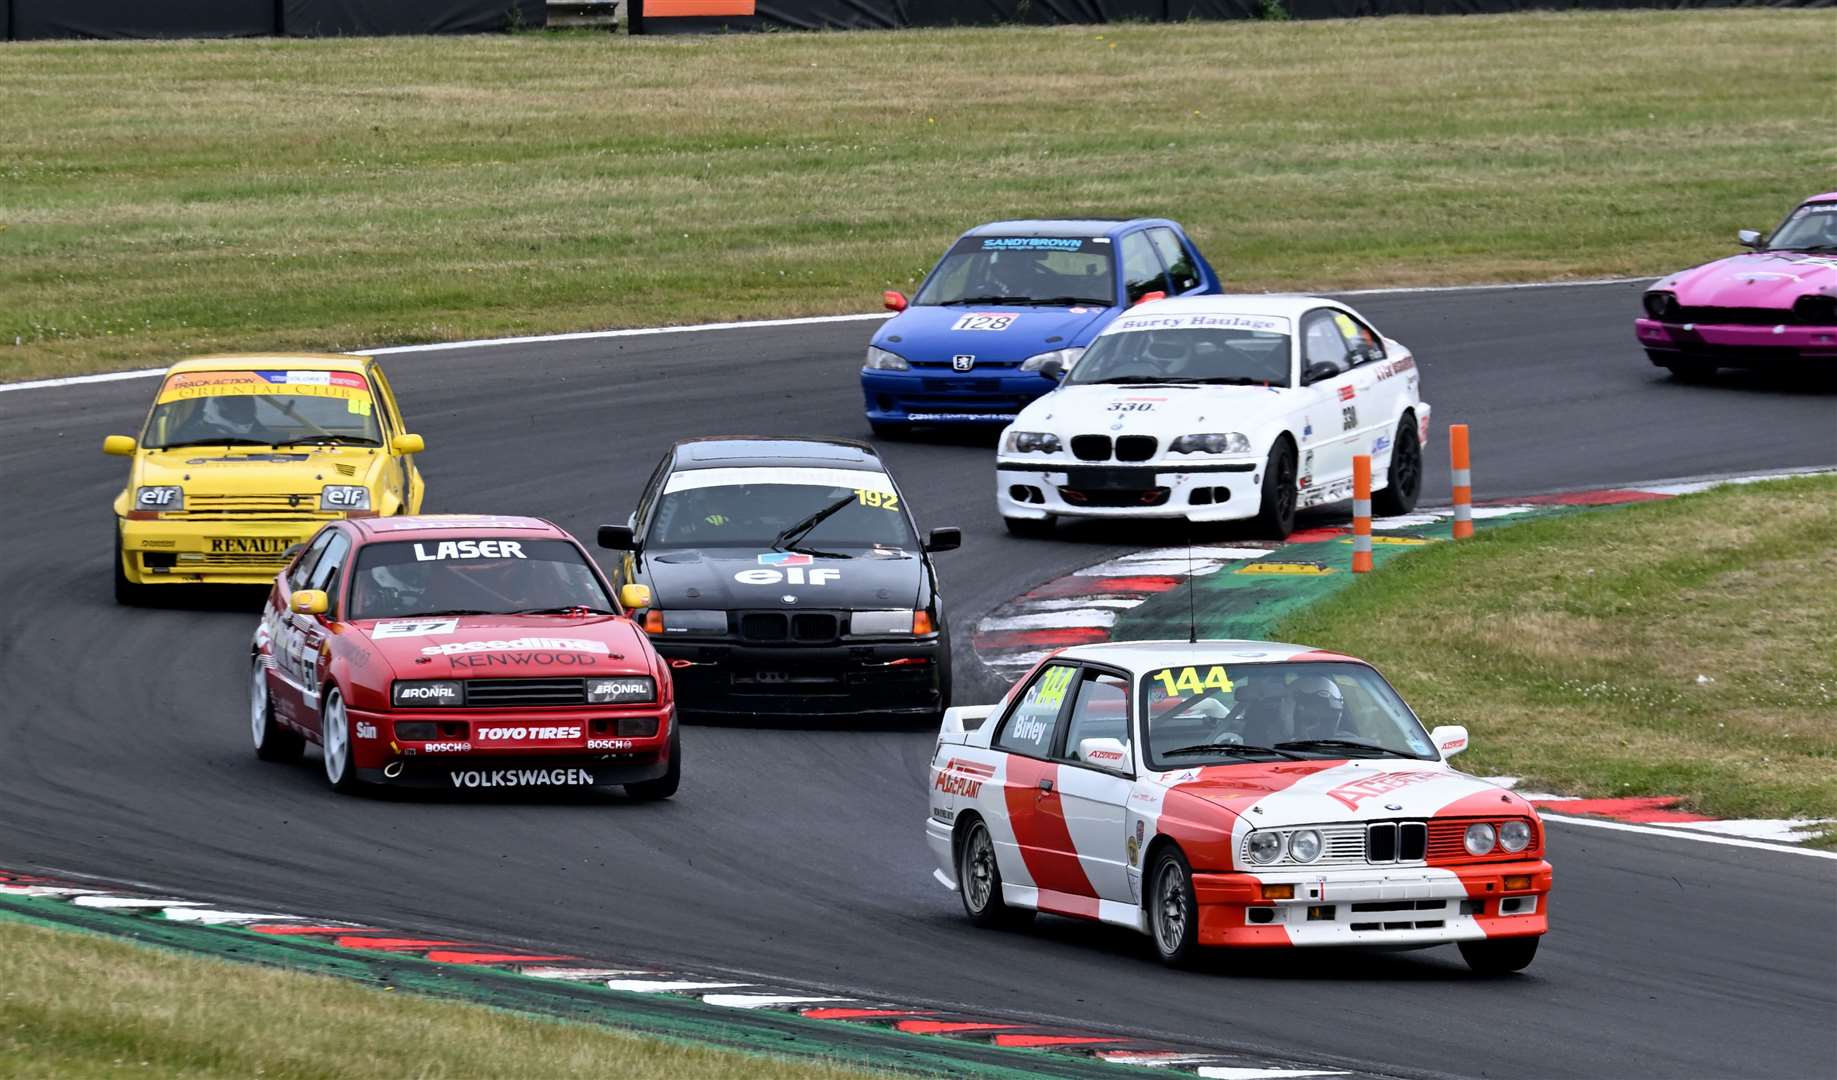 Rod Birley, from West Kingsdown, handled a BMW E30 M3 in the Pre 93 races on Saturday. Picture: Simon Hildrew